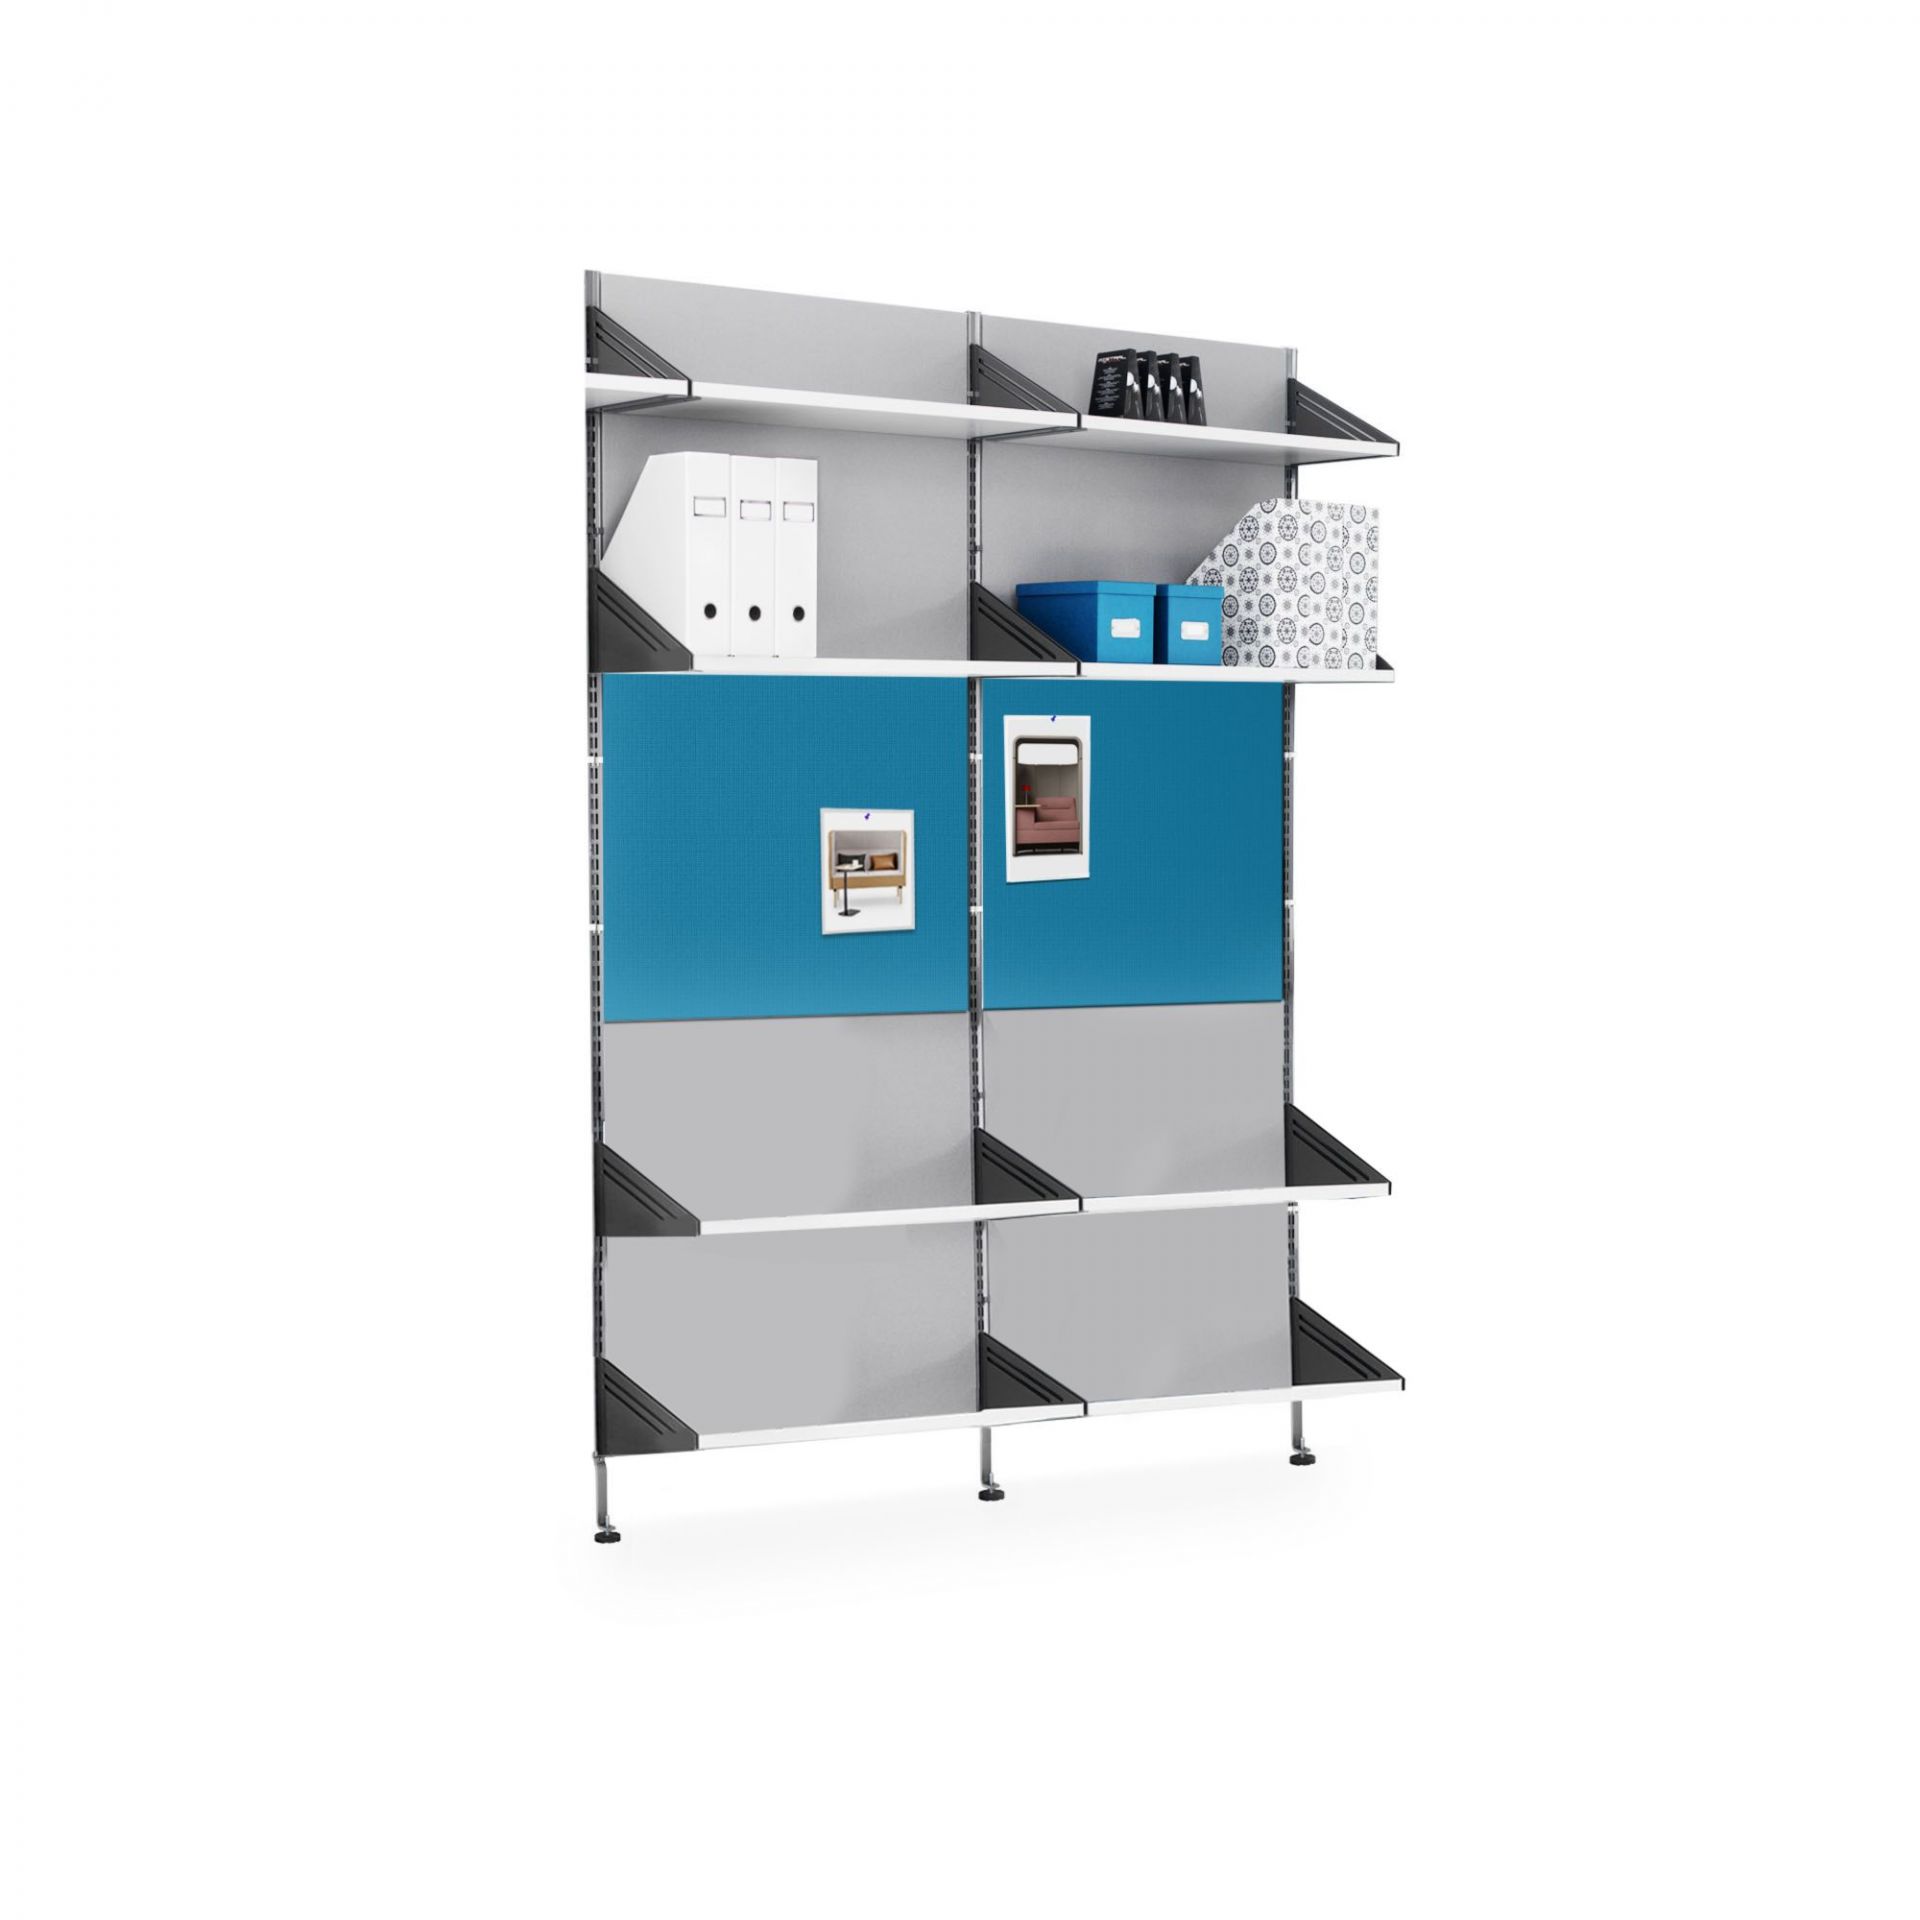 Team Pro Wall Wall-mounted storage system product image 1